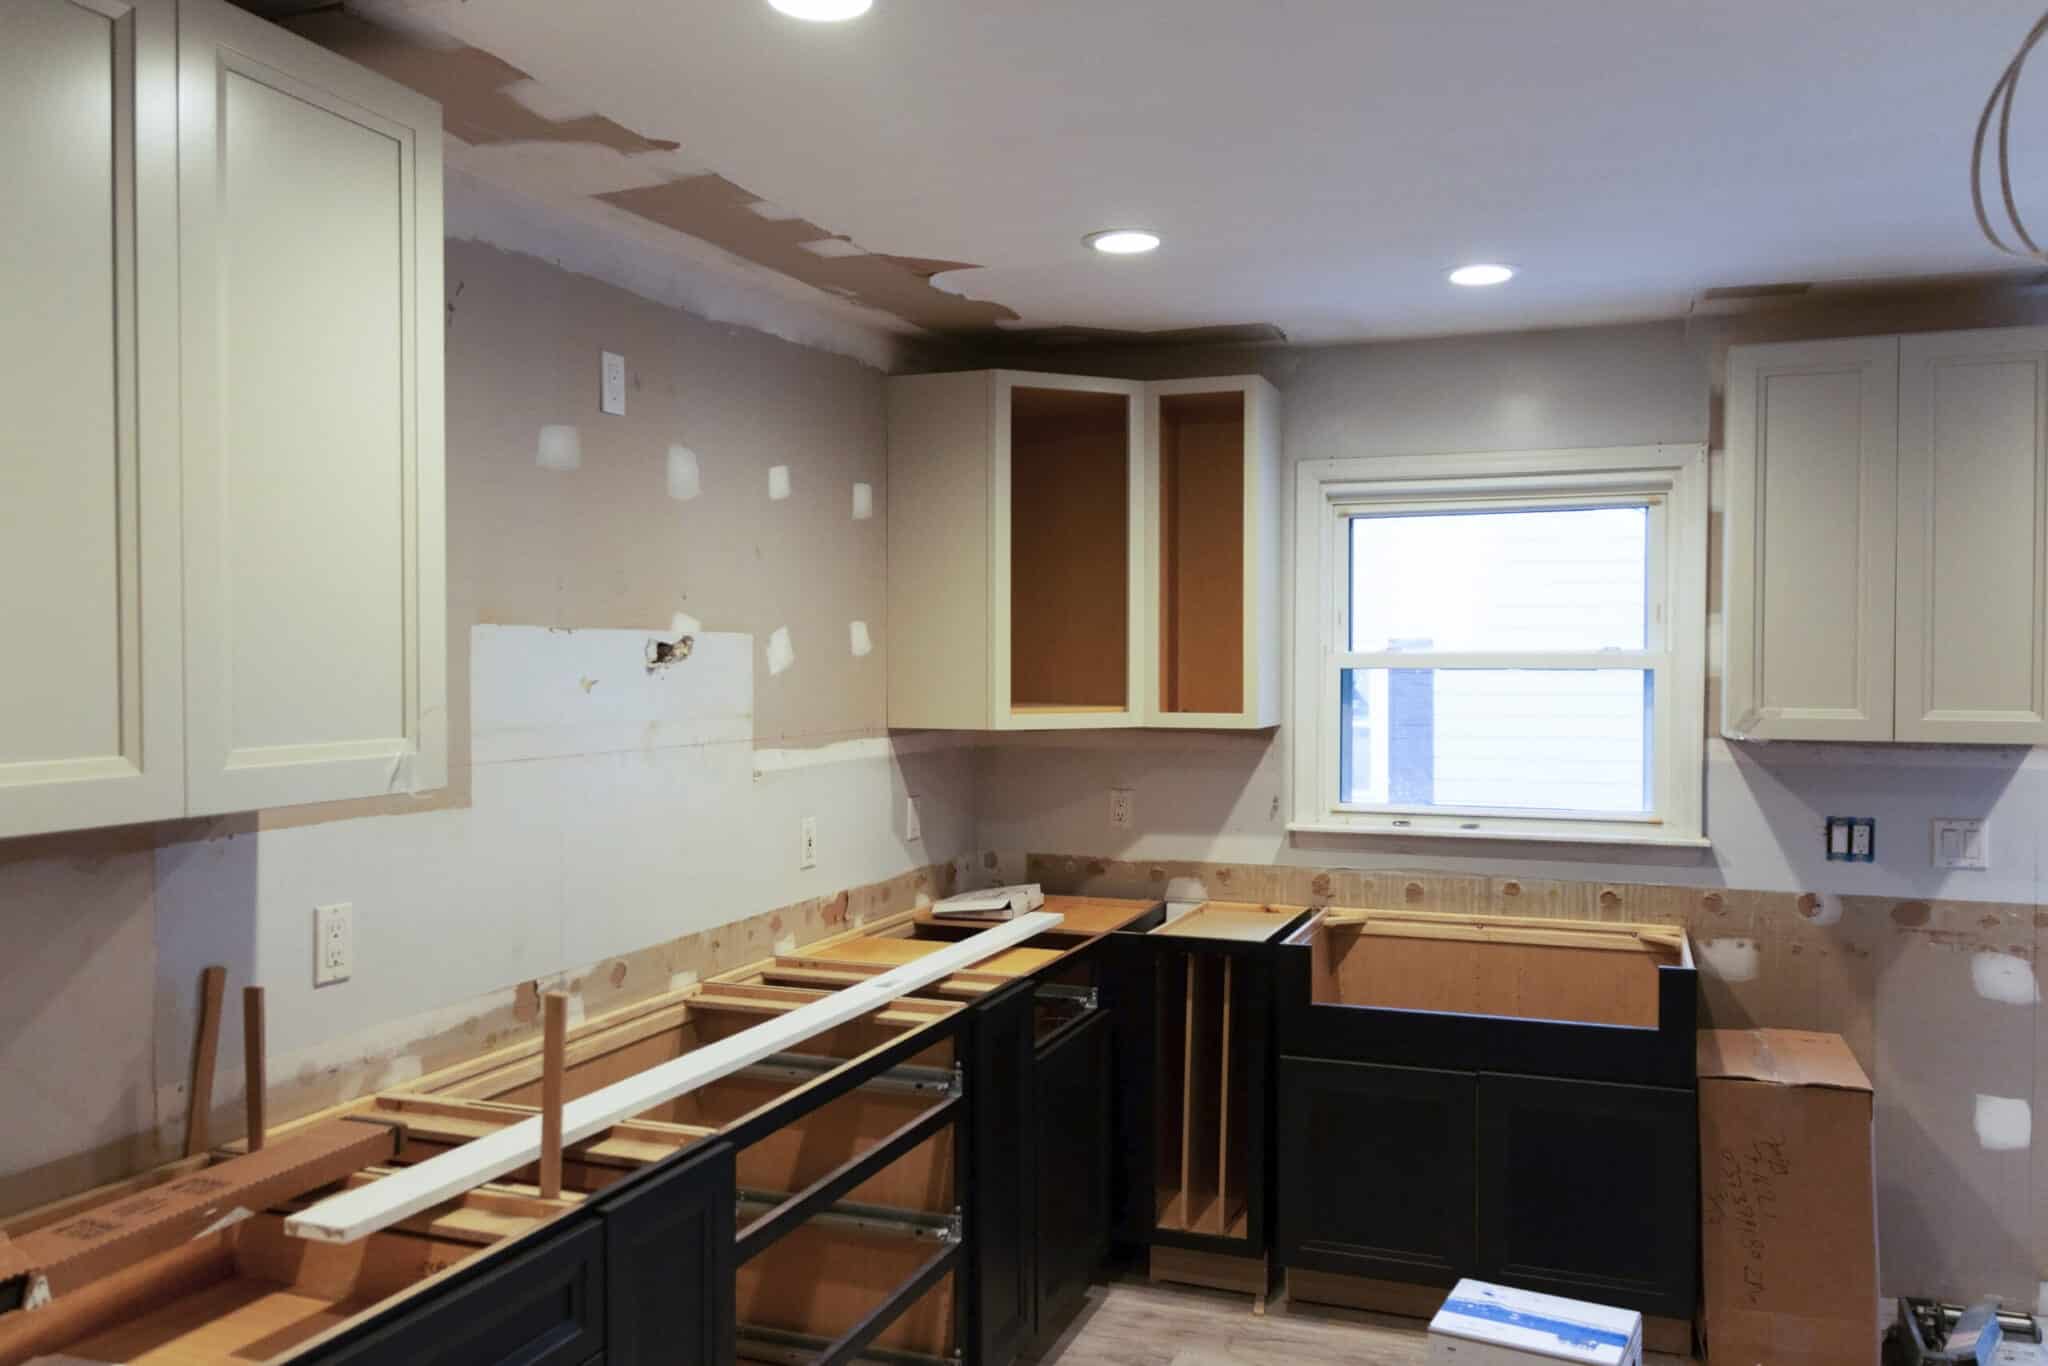 A residential house installing a new kitchen with some of the cabenits put into place but much more work to go.